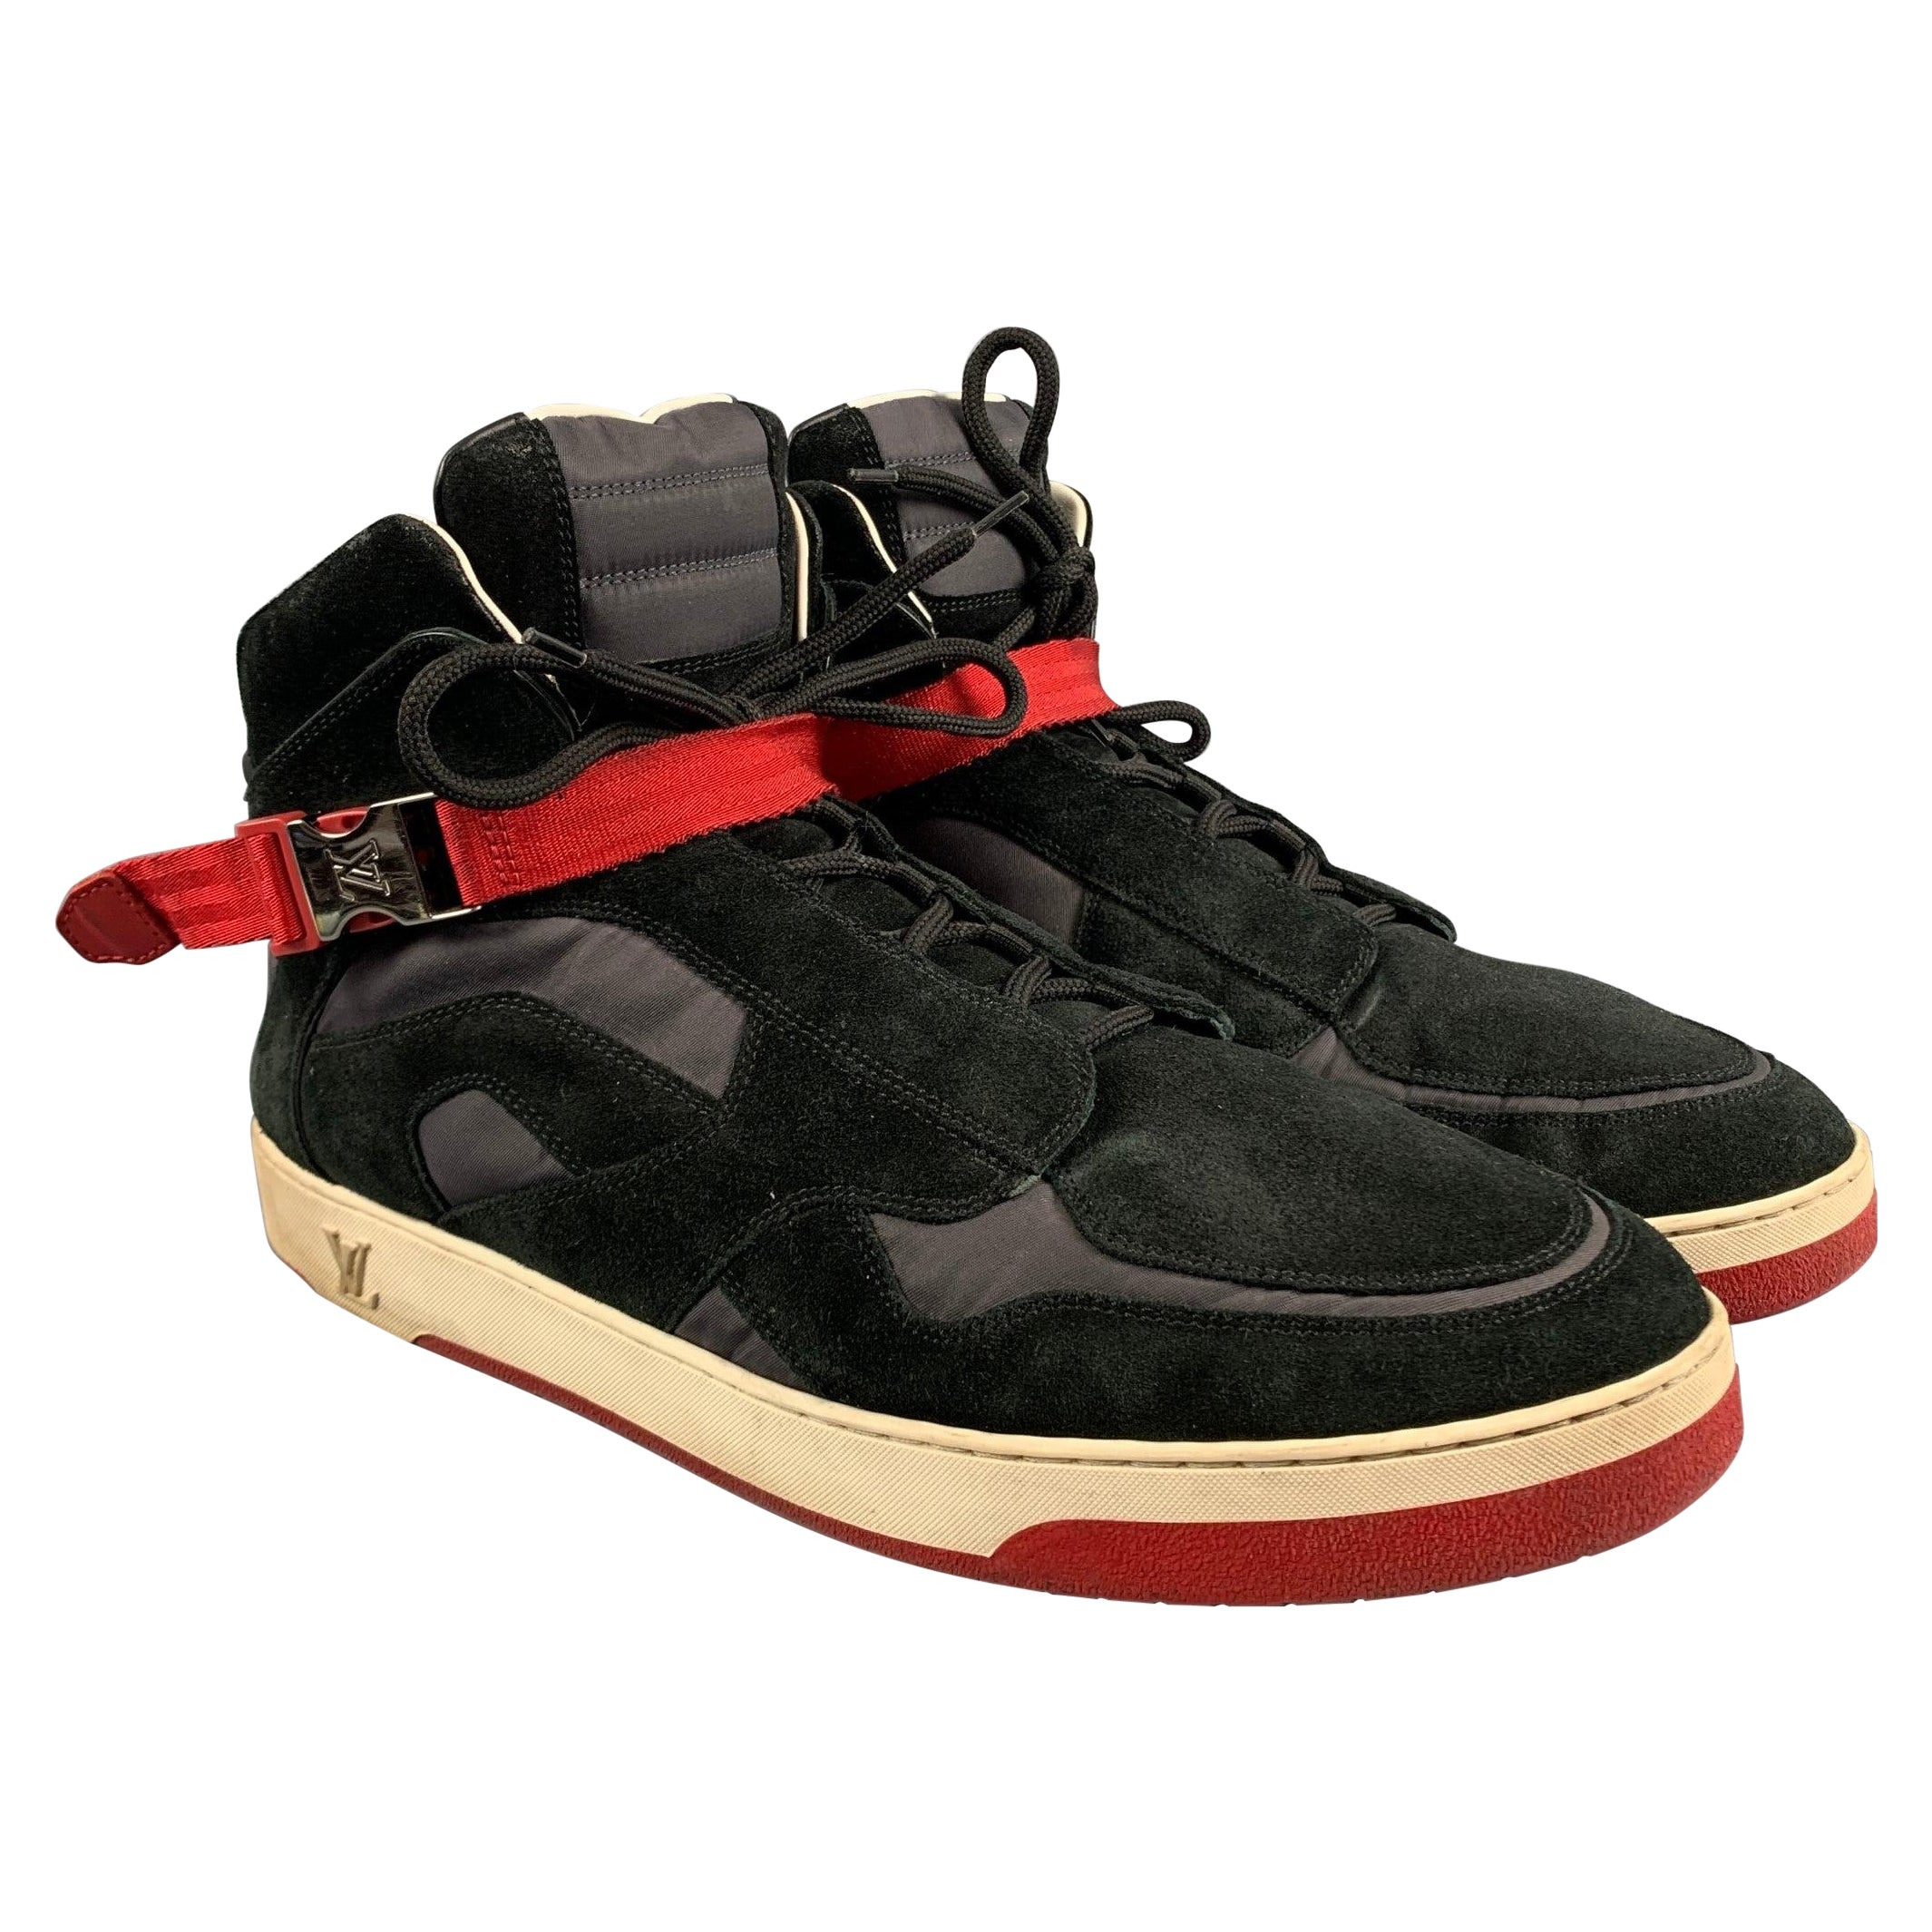 LOUIS VUITTON Size 13 Black Red  Nylon Suede High Top Sneakers For Sale